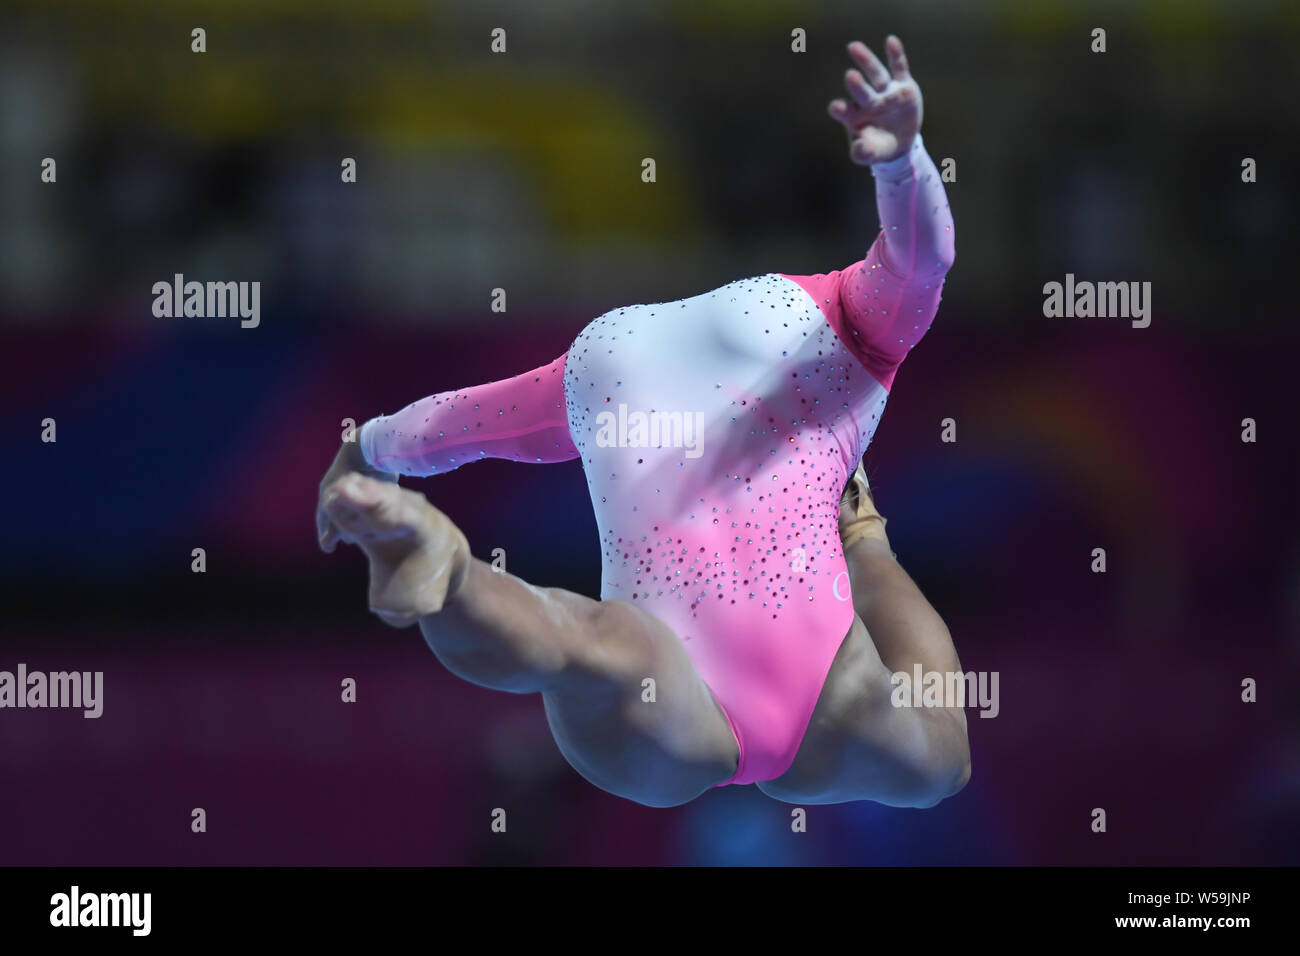 July 24, 2019, Lima, Peru: FLAVIA SARAIVA from Brazil executes an excellent switch  ring leap on the floor exercise during podium training before the  competition held in the Polideportivo Villa El Salvador